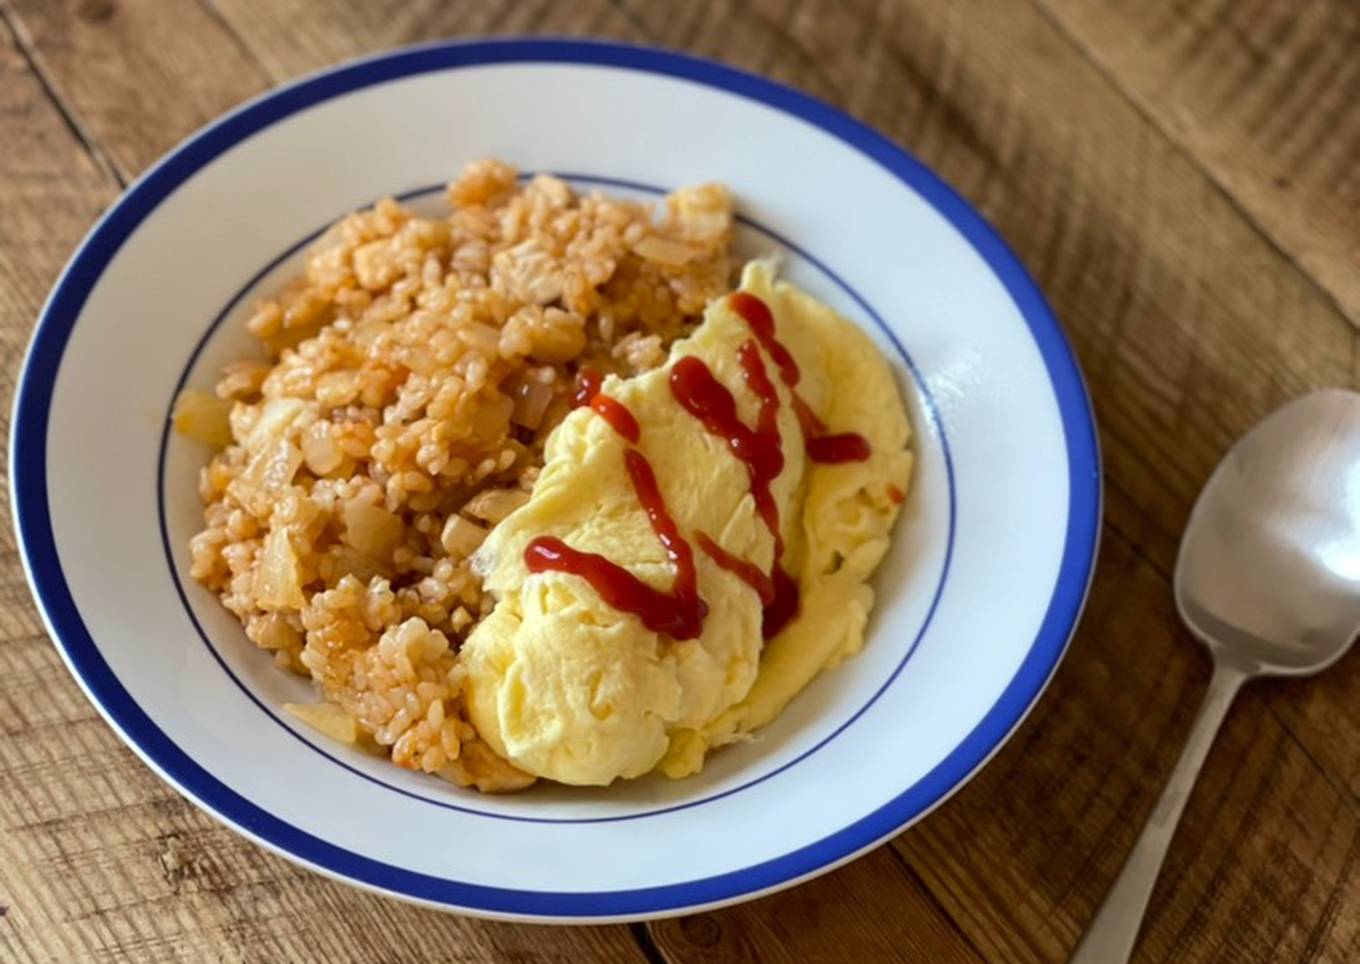 Chicken Omurice – the old classic Japanese comfort meal, chicken kitchup rice with omlette